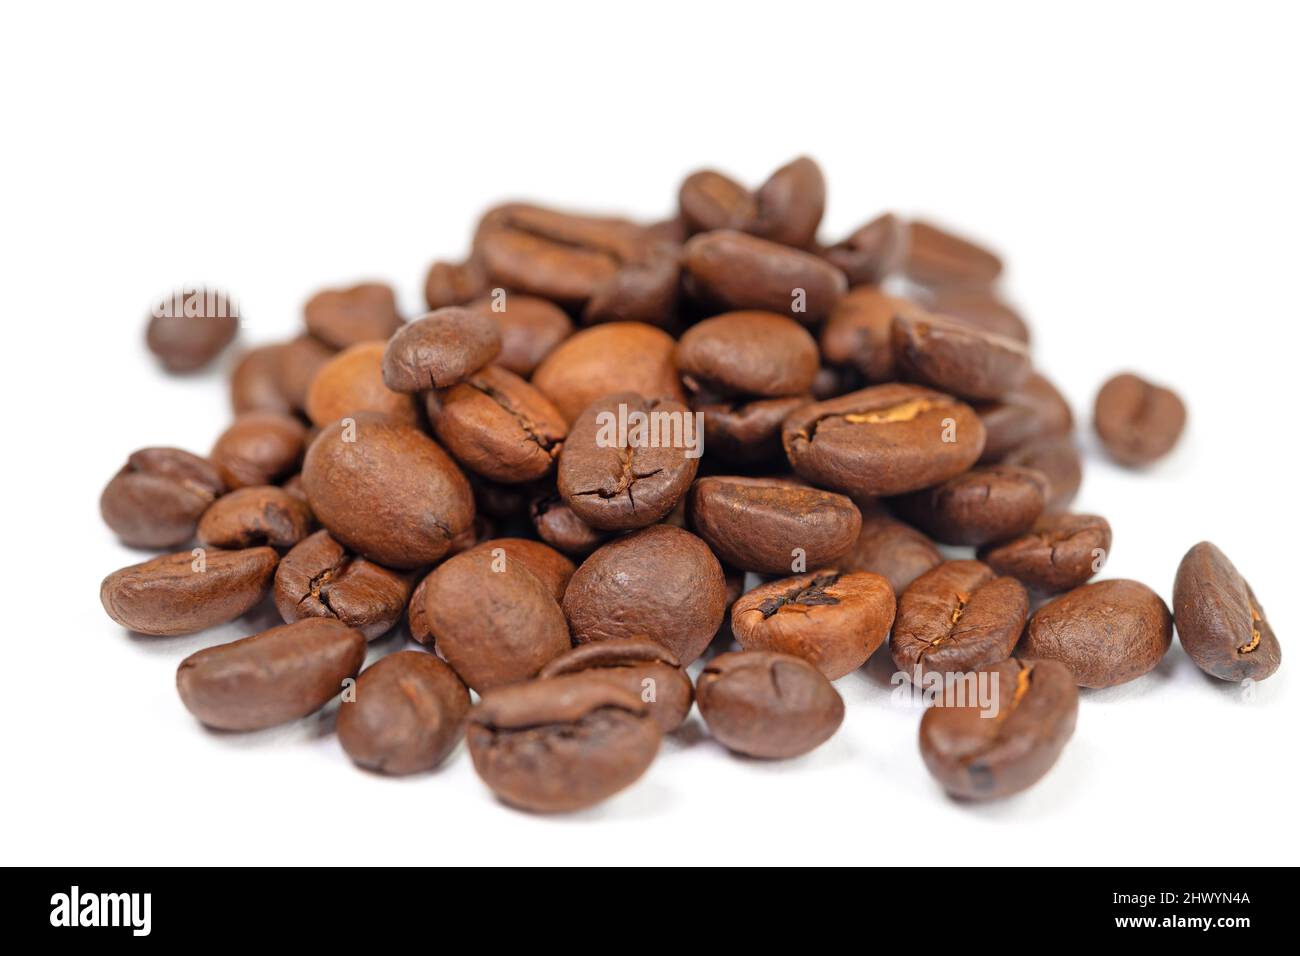 Roasted coffee beans against white background Stock Photo